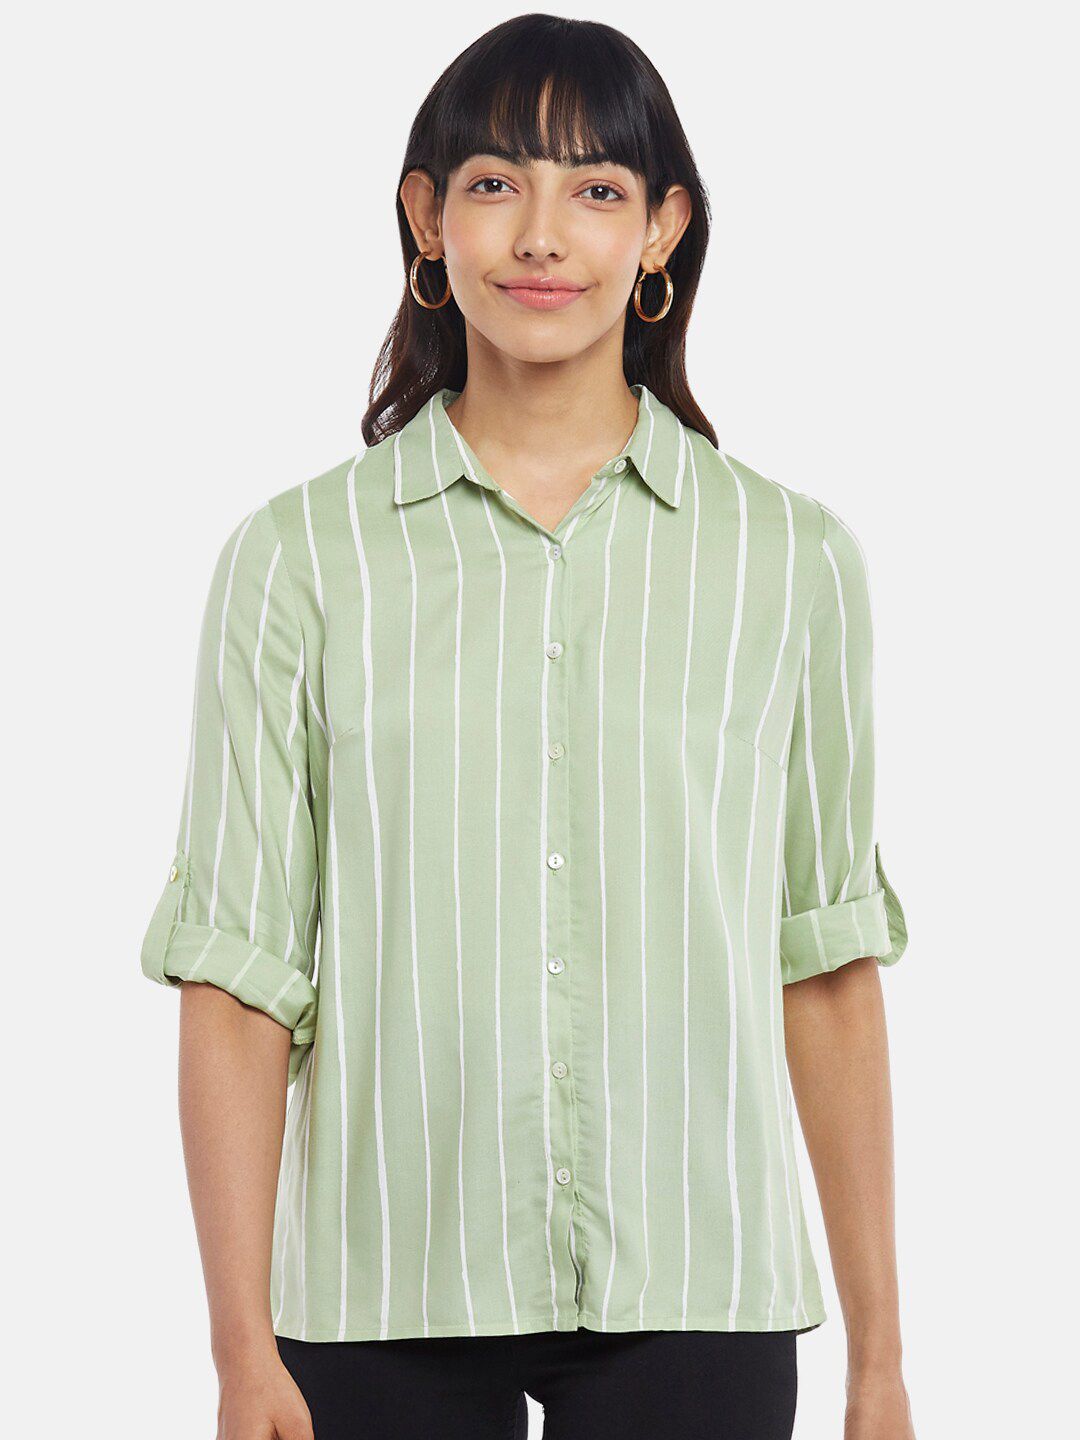 Honey by Pantaloons Olive Green Striped Roll-Up Sleeves Shirt Style Top Price in India